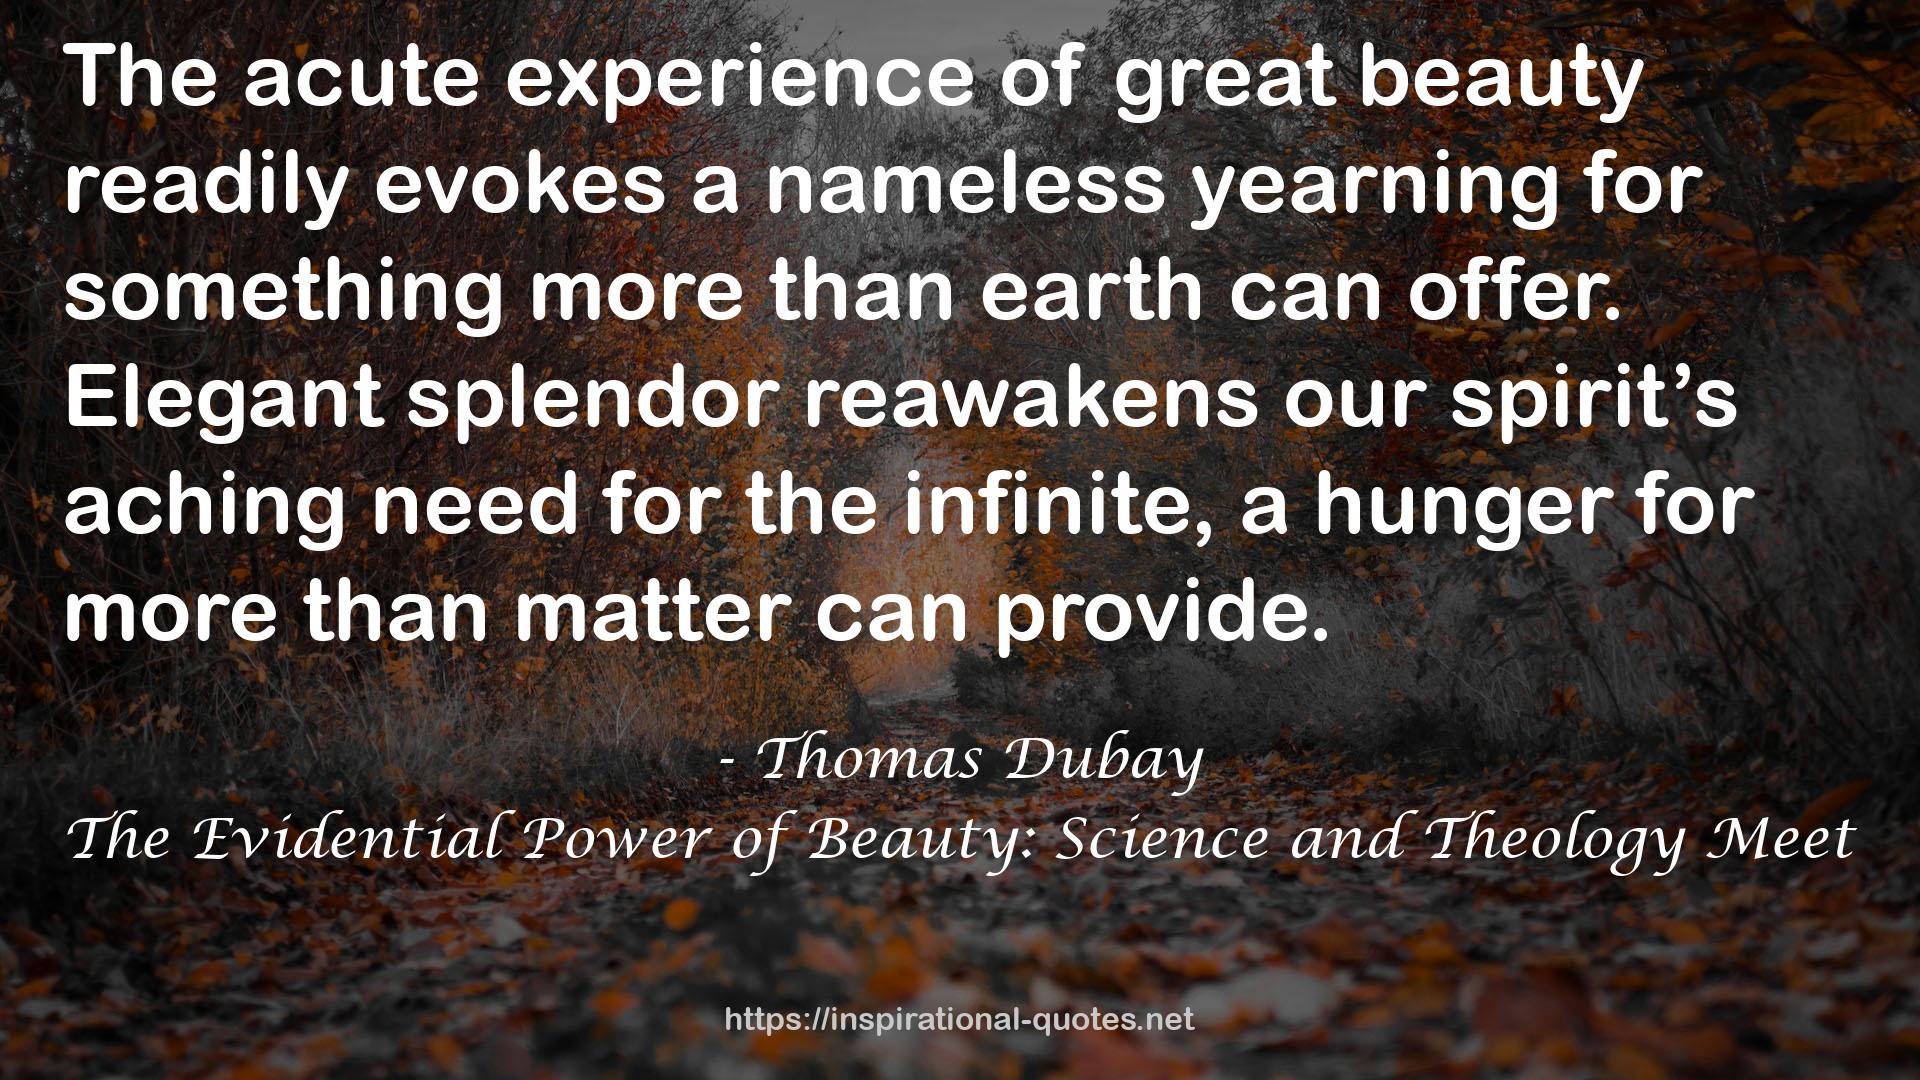 The Evidential Power of Beauty: Science and Theology Meet QUOTES